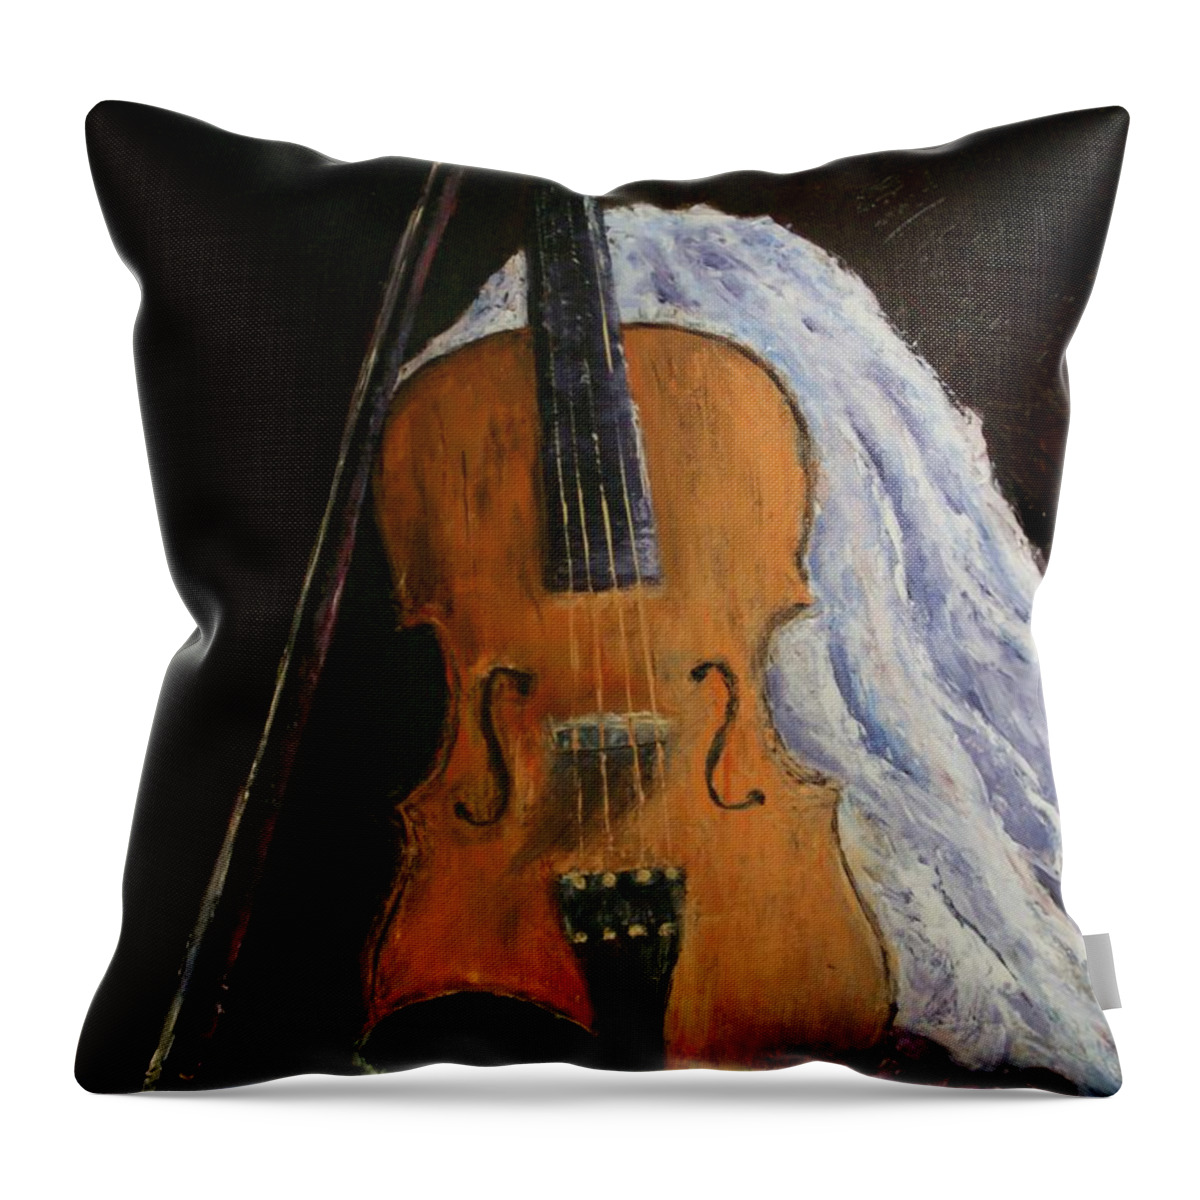 Original Throw Pillow featuring the painting Intermission by Stephen King